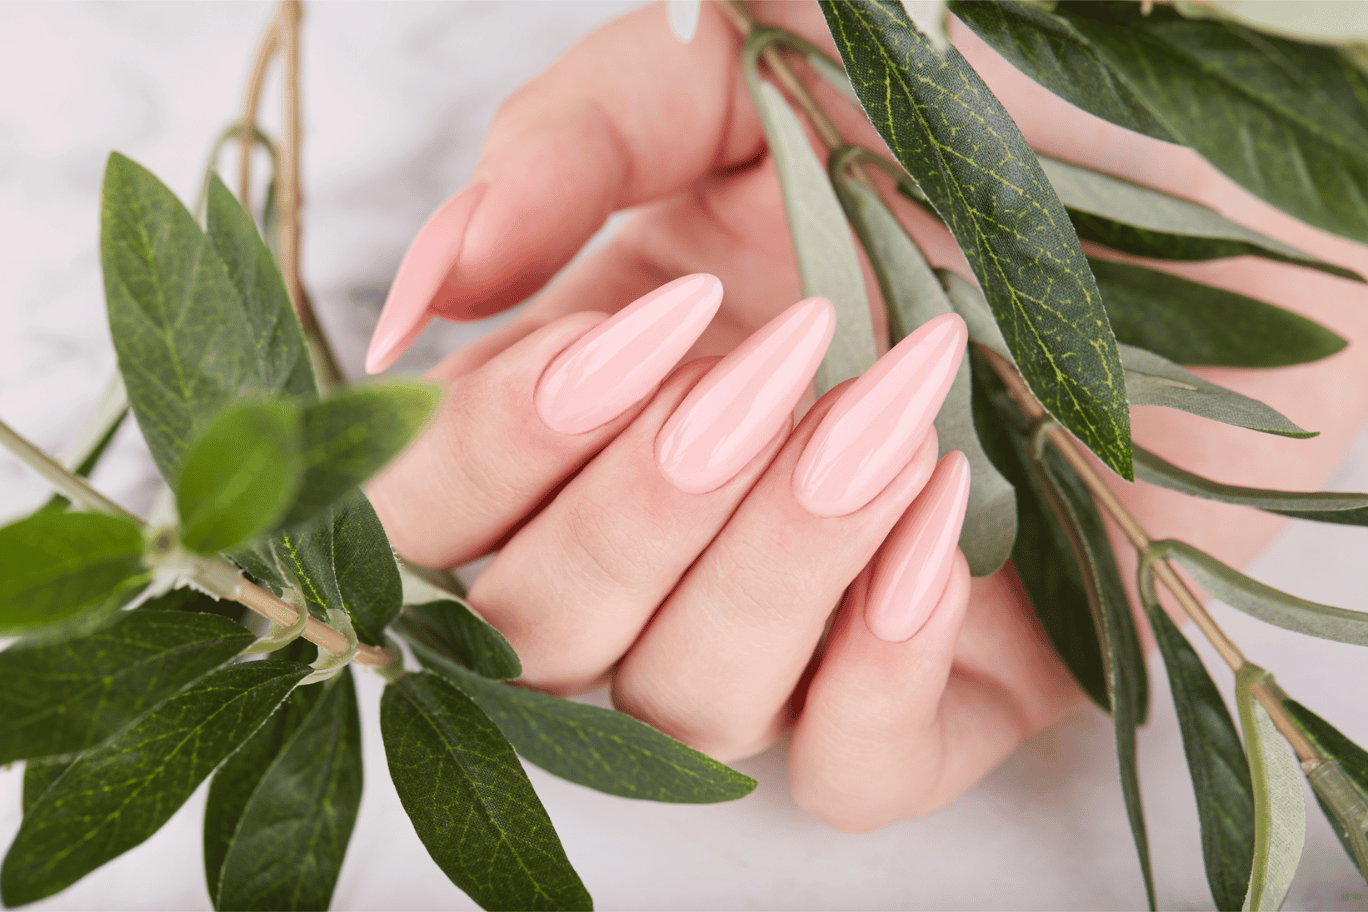 Pink nails in an almond shape